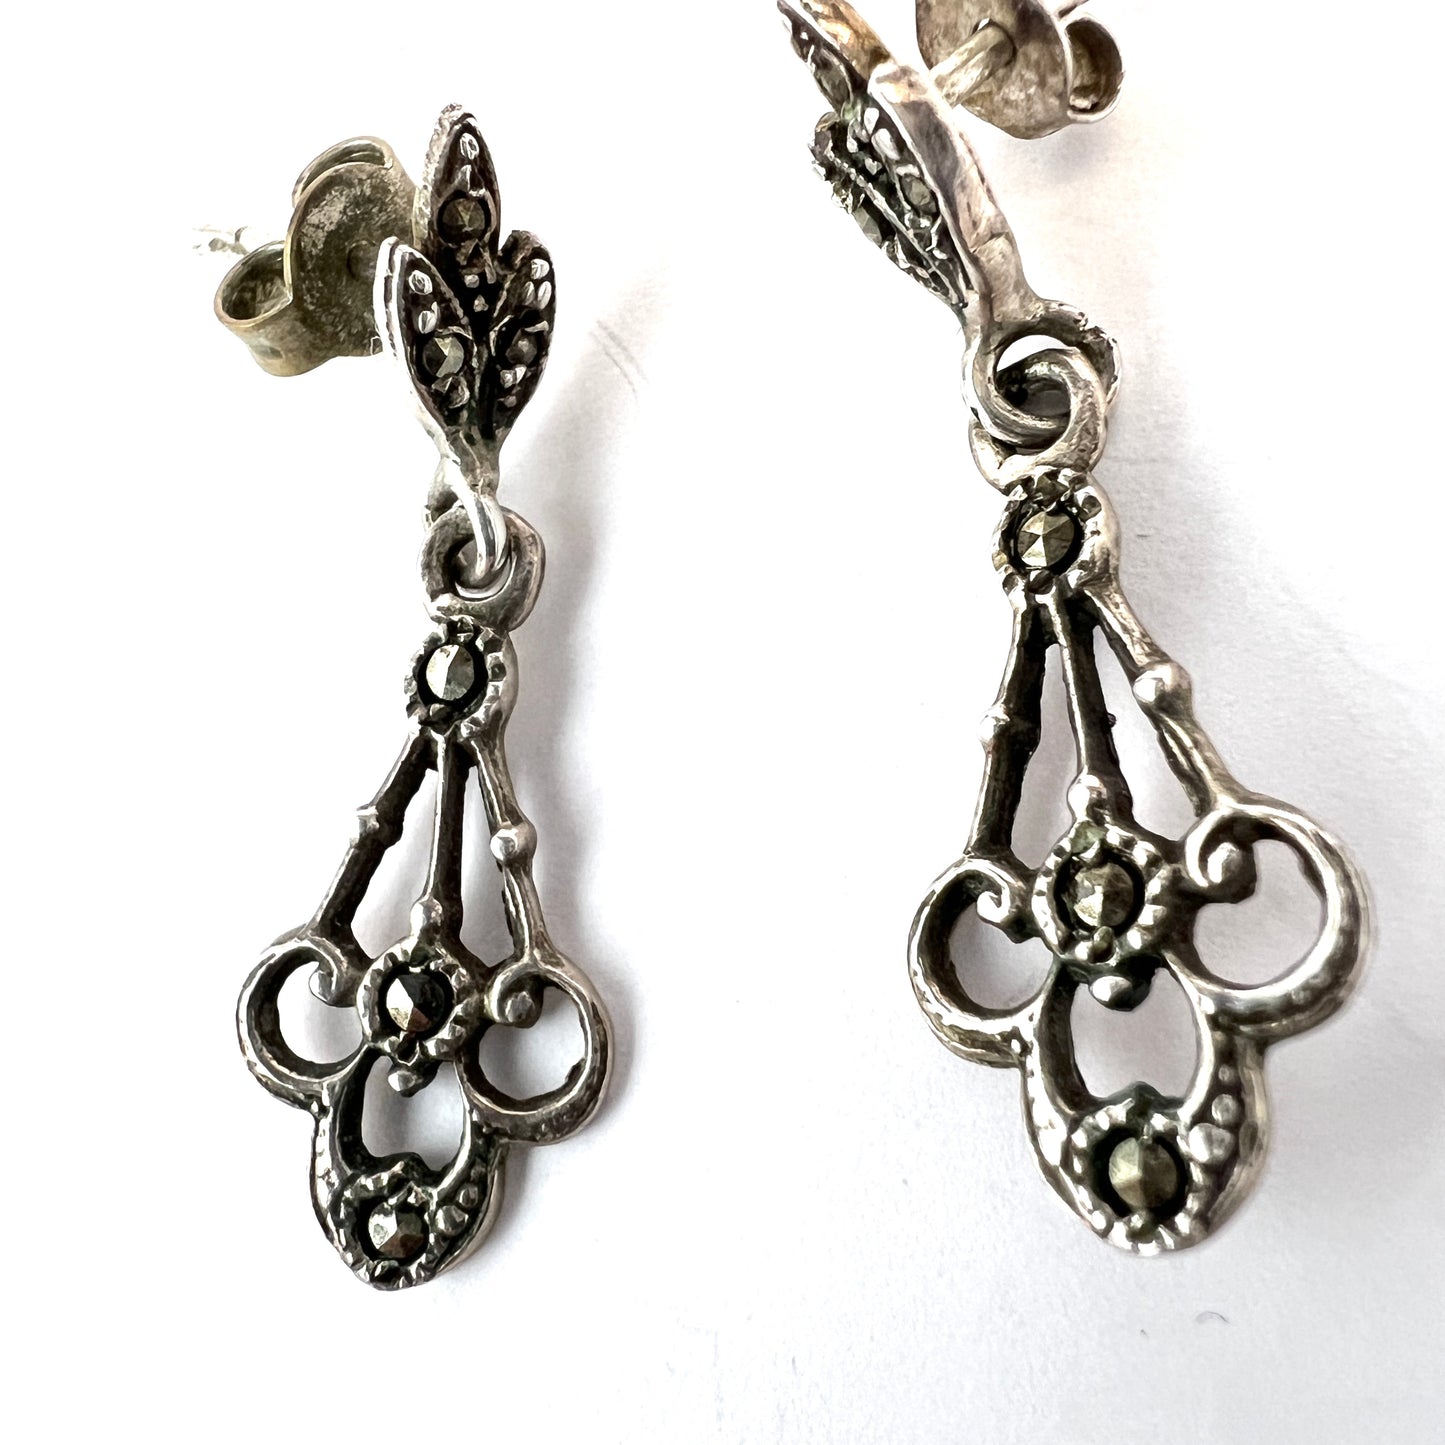 Early 1900s. Solid Silver Marcasite Earrings.